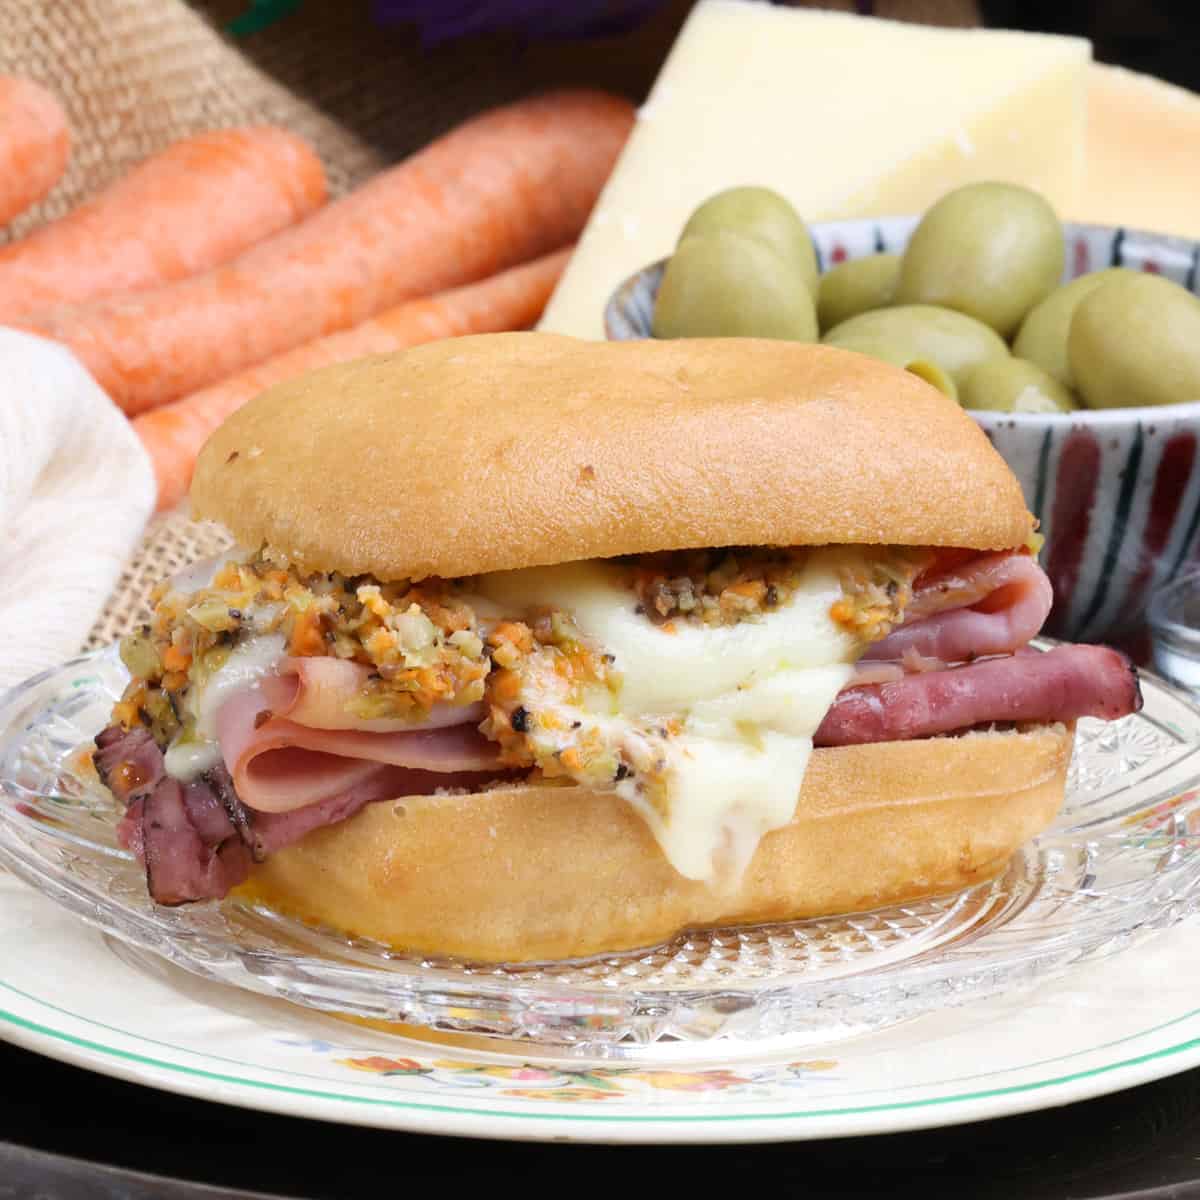 a single muffuletta sandwich with cheese melted and dripping down the sides